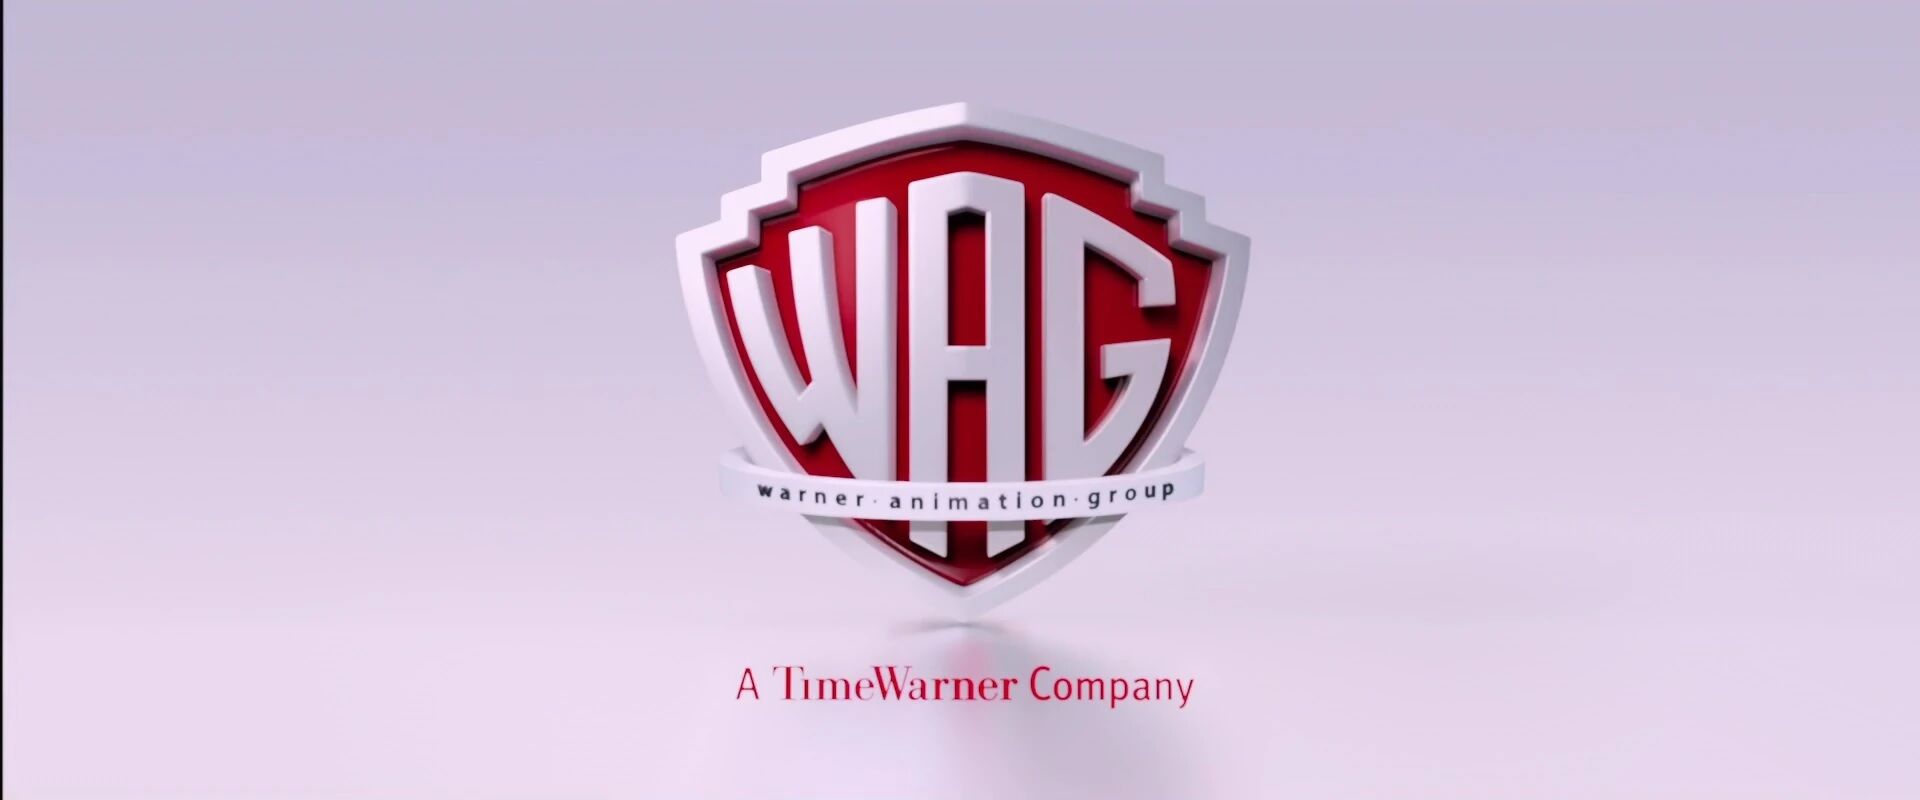 List of Warner Bros. Animation productions - Wikipedia